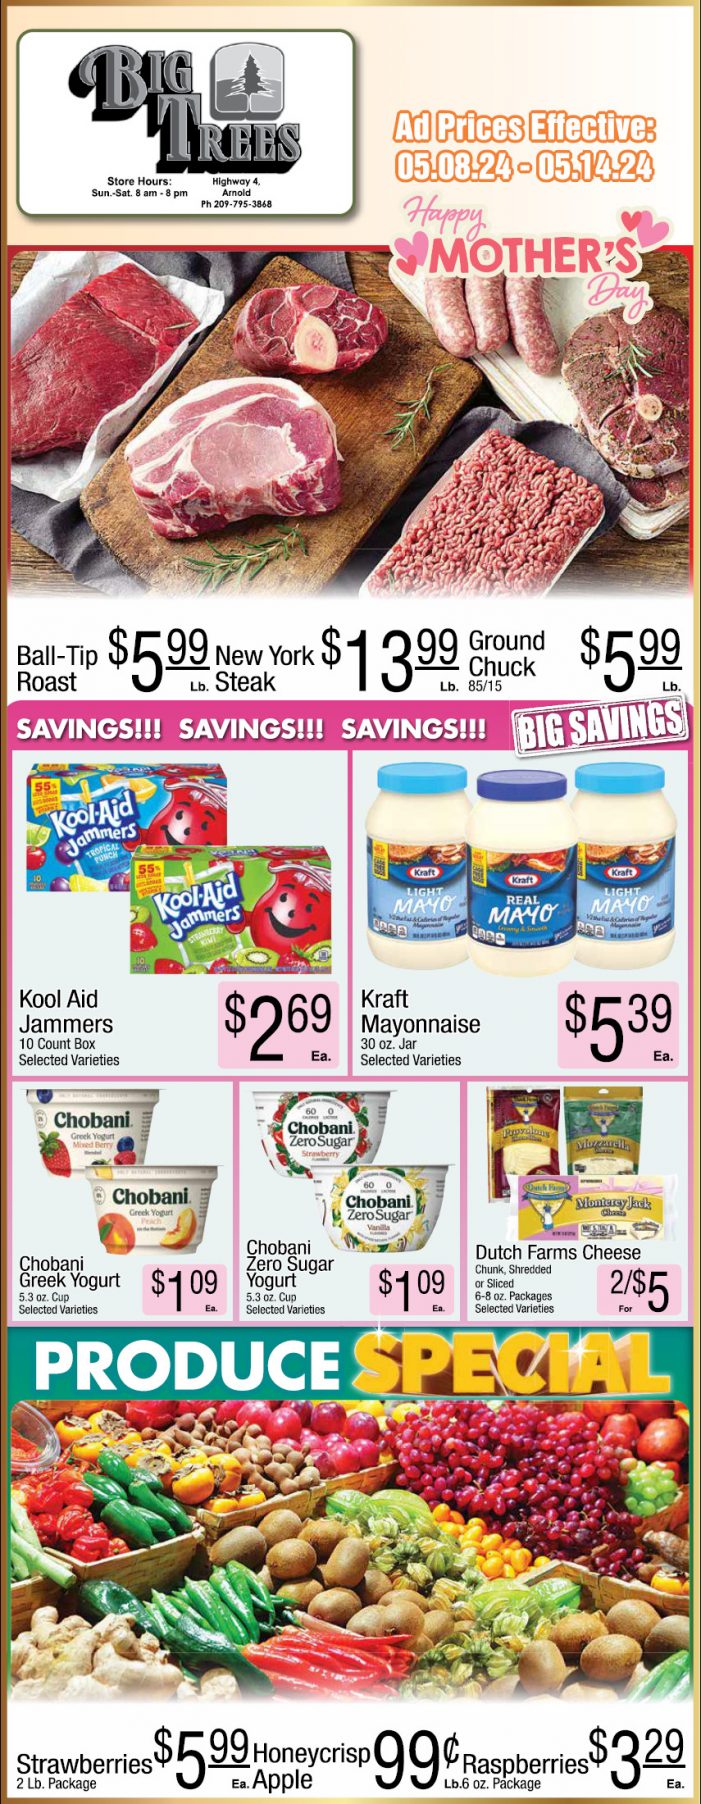 Big Trees Market Weekly Ad, Grocery, Produce, Meat & Deli Specials Through May 14th! Shop Local & Save!